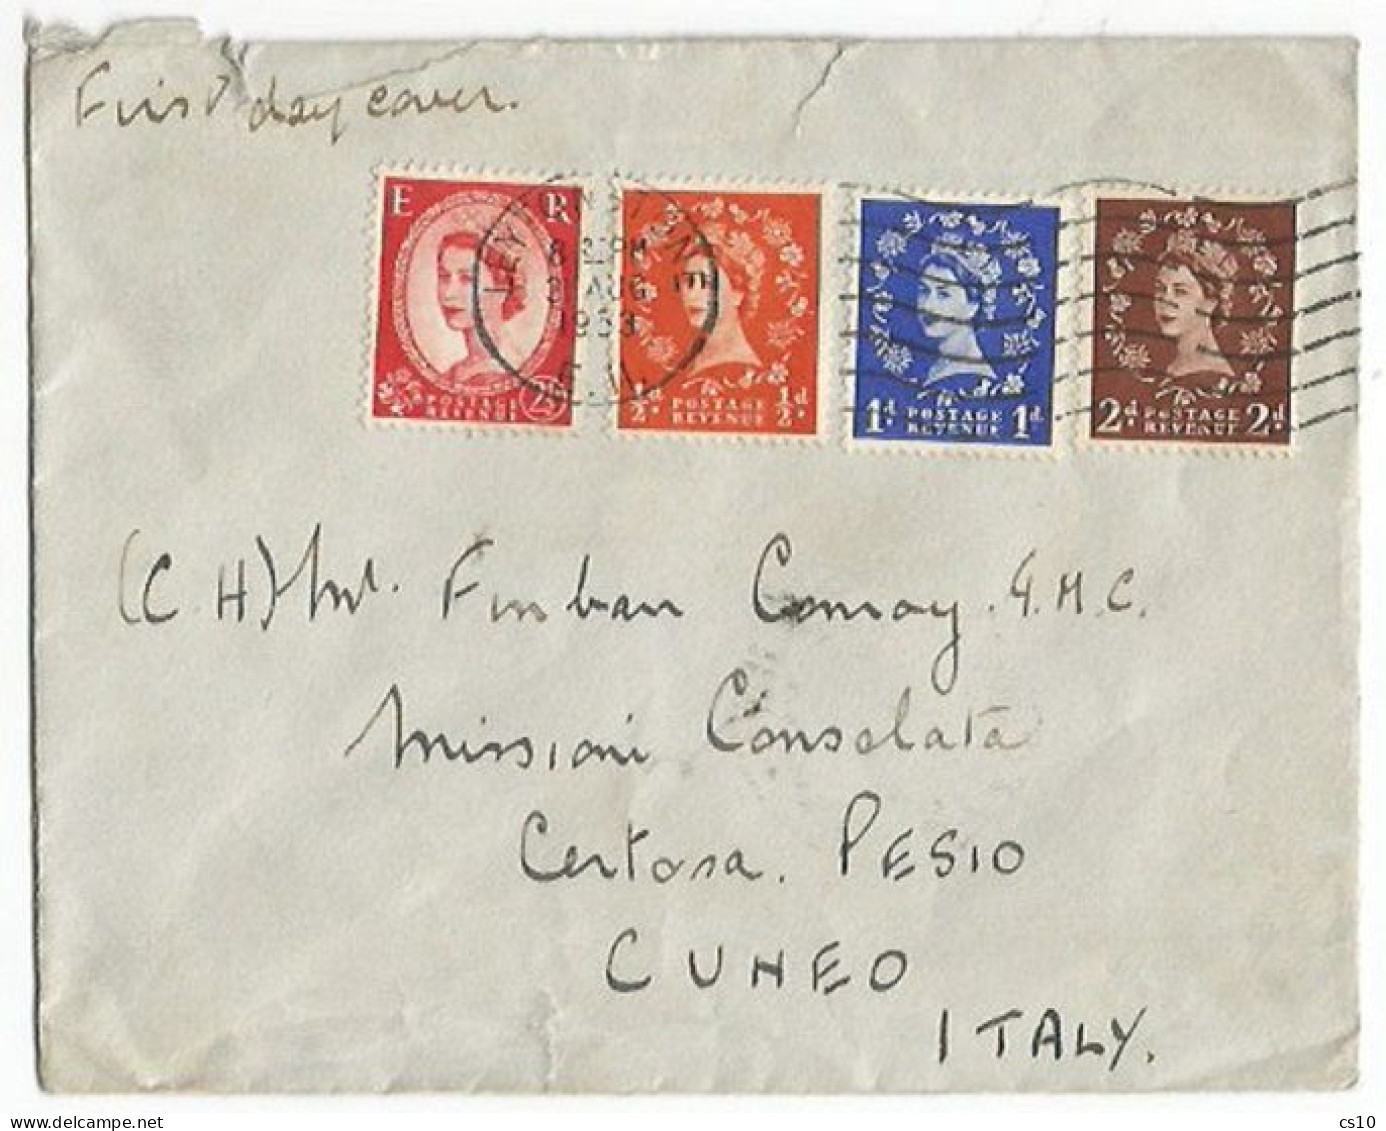 UK Britain QE2 Wilding FDC 4v Regular Issue Sent From Leytonstone 31aug1953 To Italy - Briefe U. Dokumente